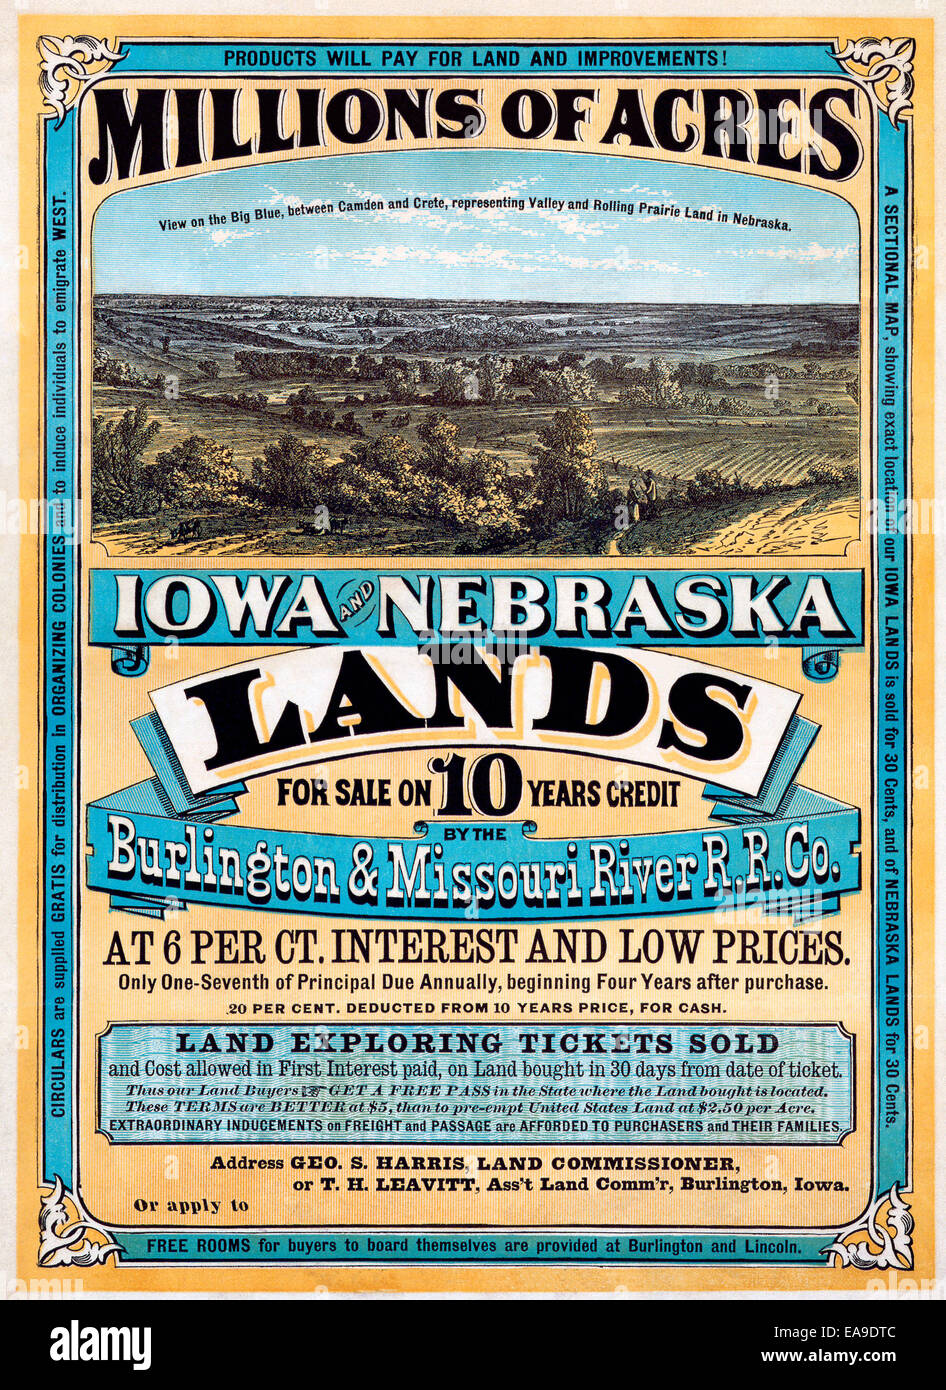 Land offers in Iowa and Nebraska - Millions of acres. Iowa and Nebraska. Land for sale on 10 years credit by the Burlington & Missouri River R. R. Co. at 6 per ct interest and low prices ... Buffalo. N. Y. Commercial advertiser printing house [1872]. Stock Photo